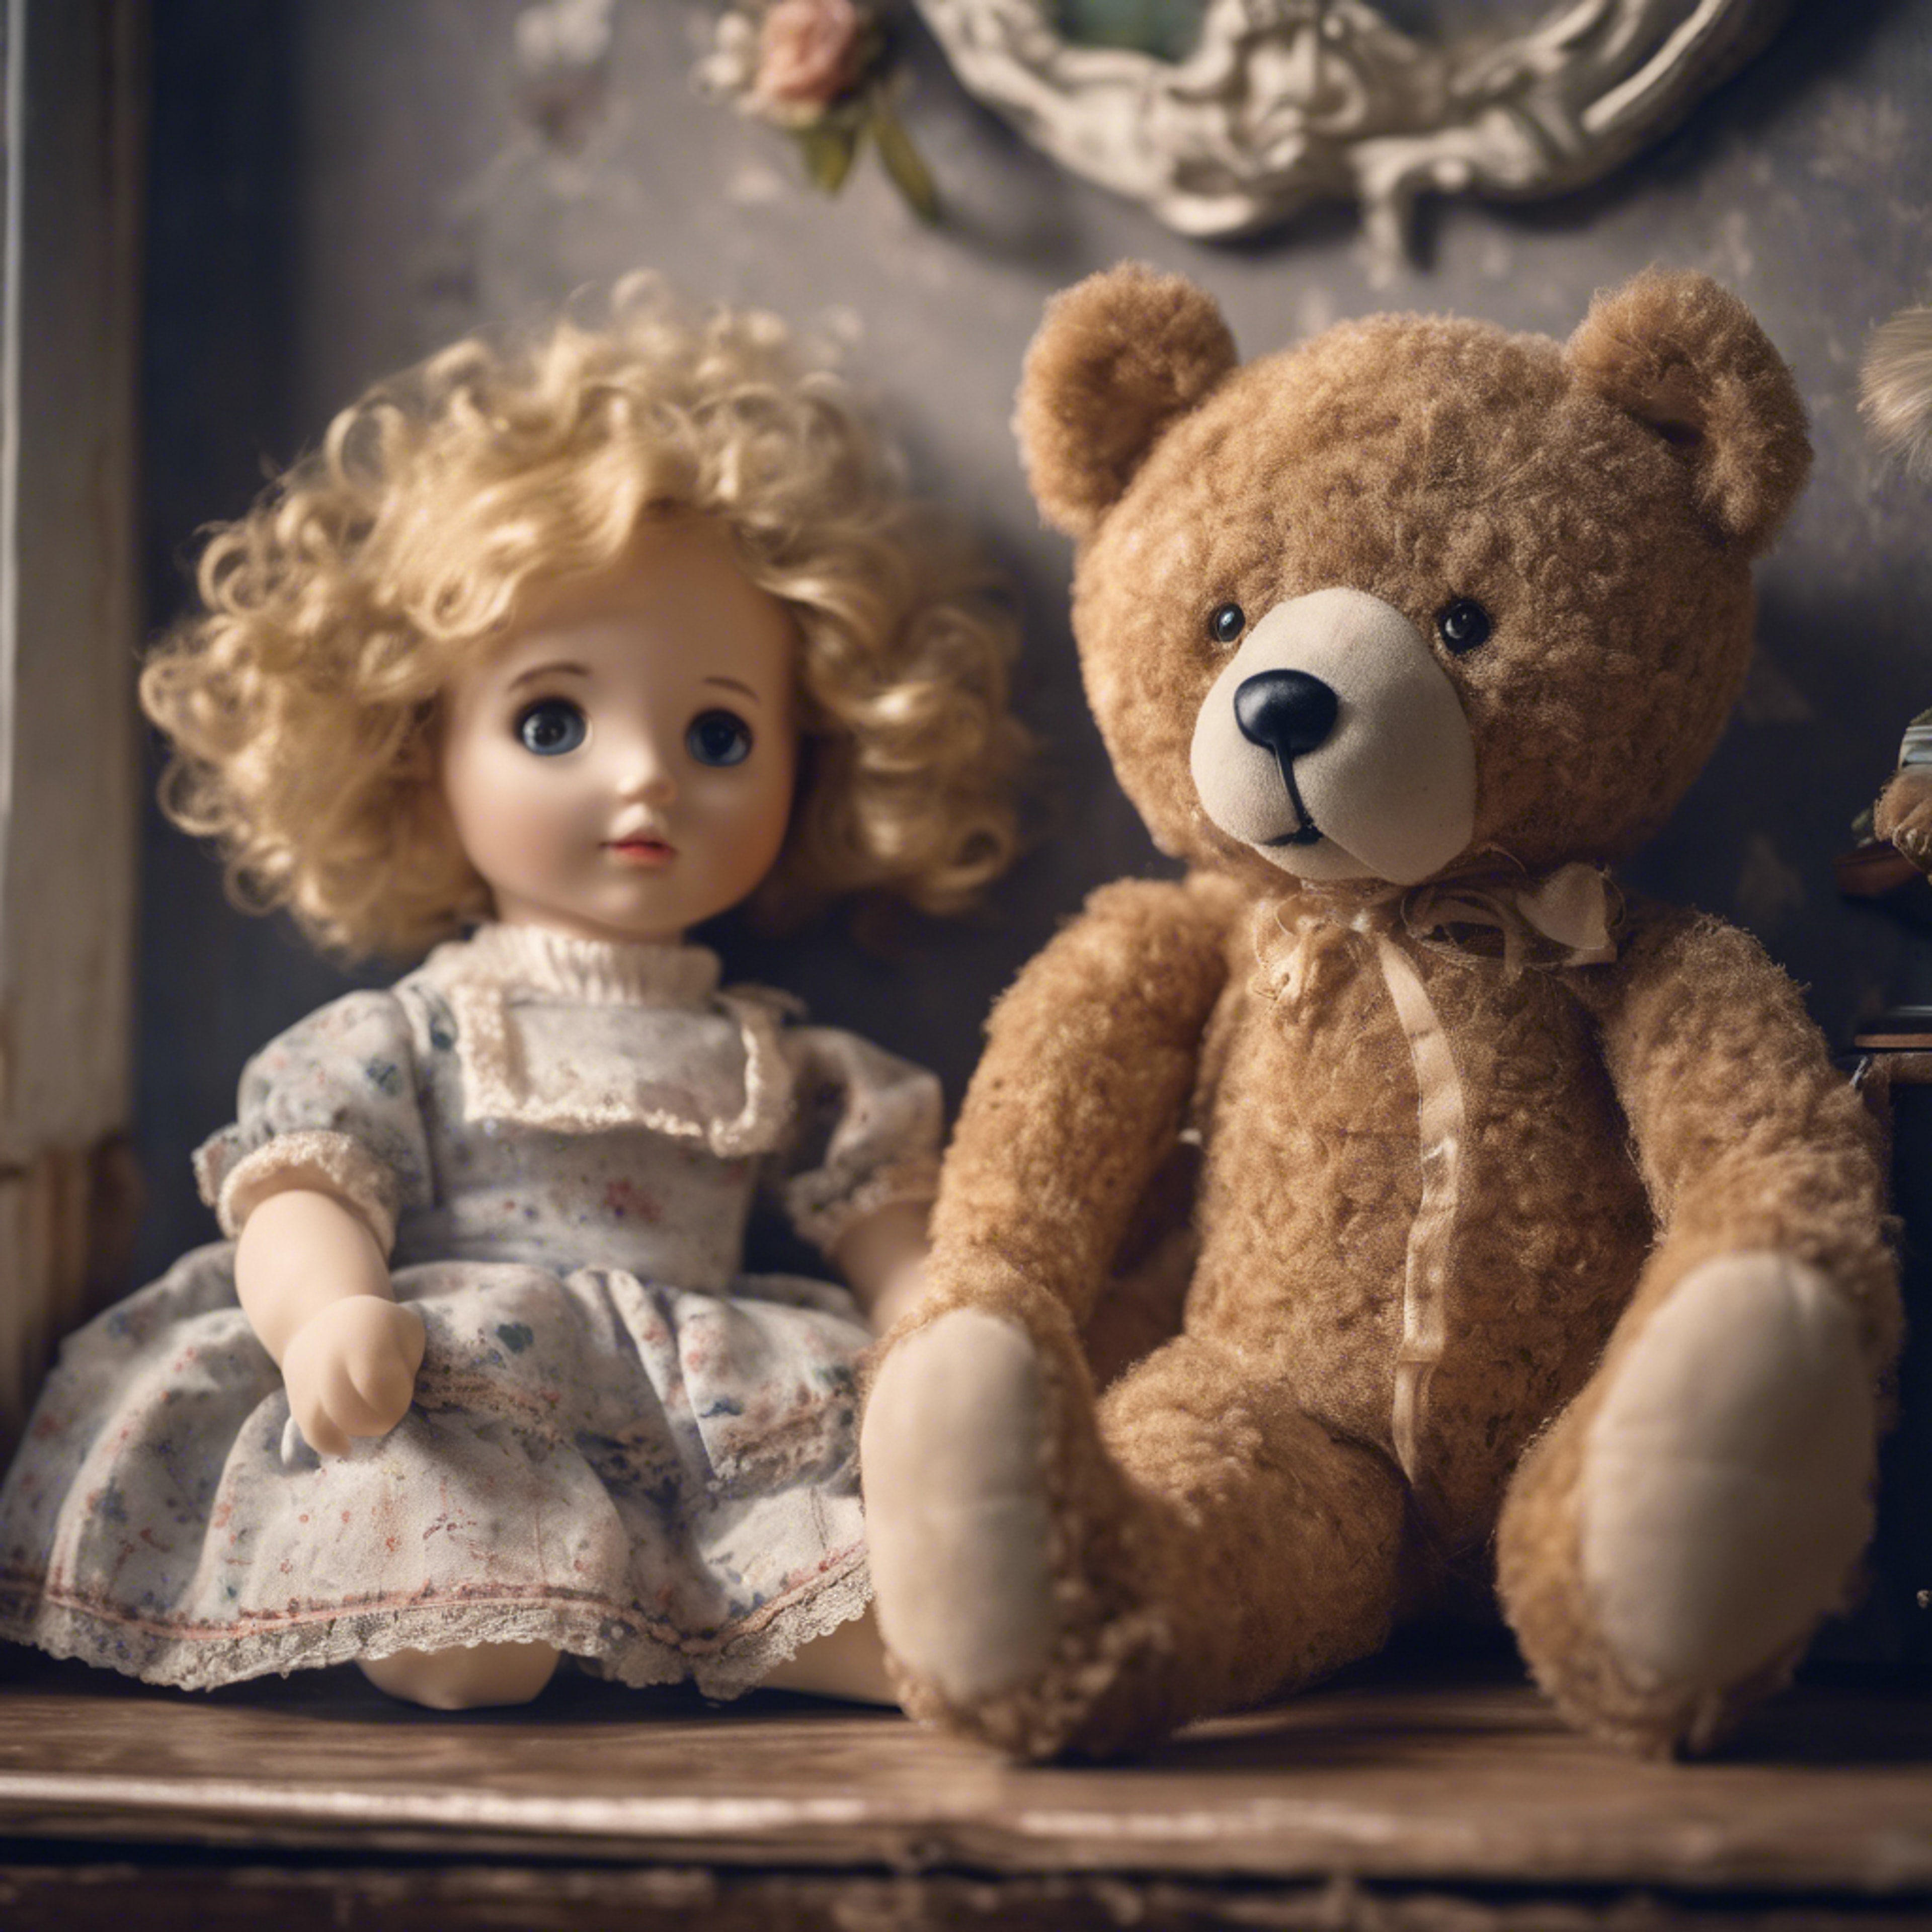 A stuffed teddy bear next to a porcelain doll in an old-fashioned child's room. Tapet[4cda63de3c9241699390]